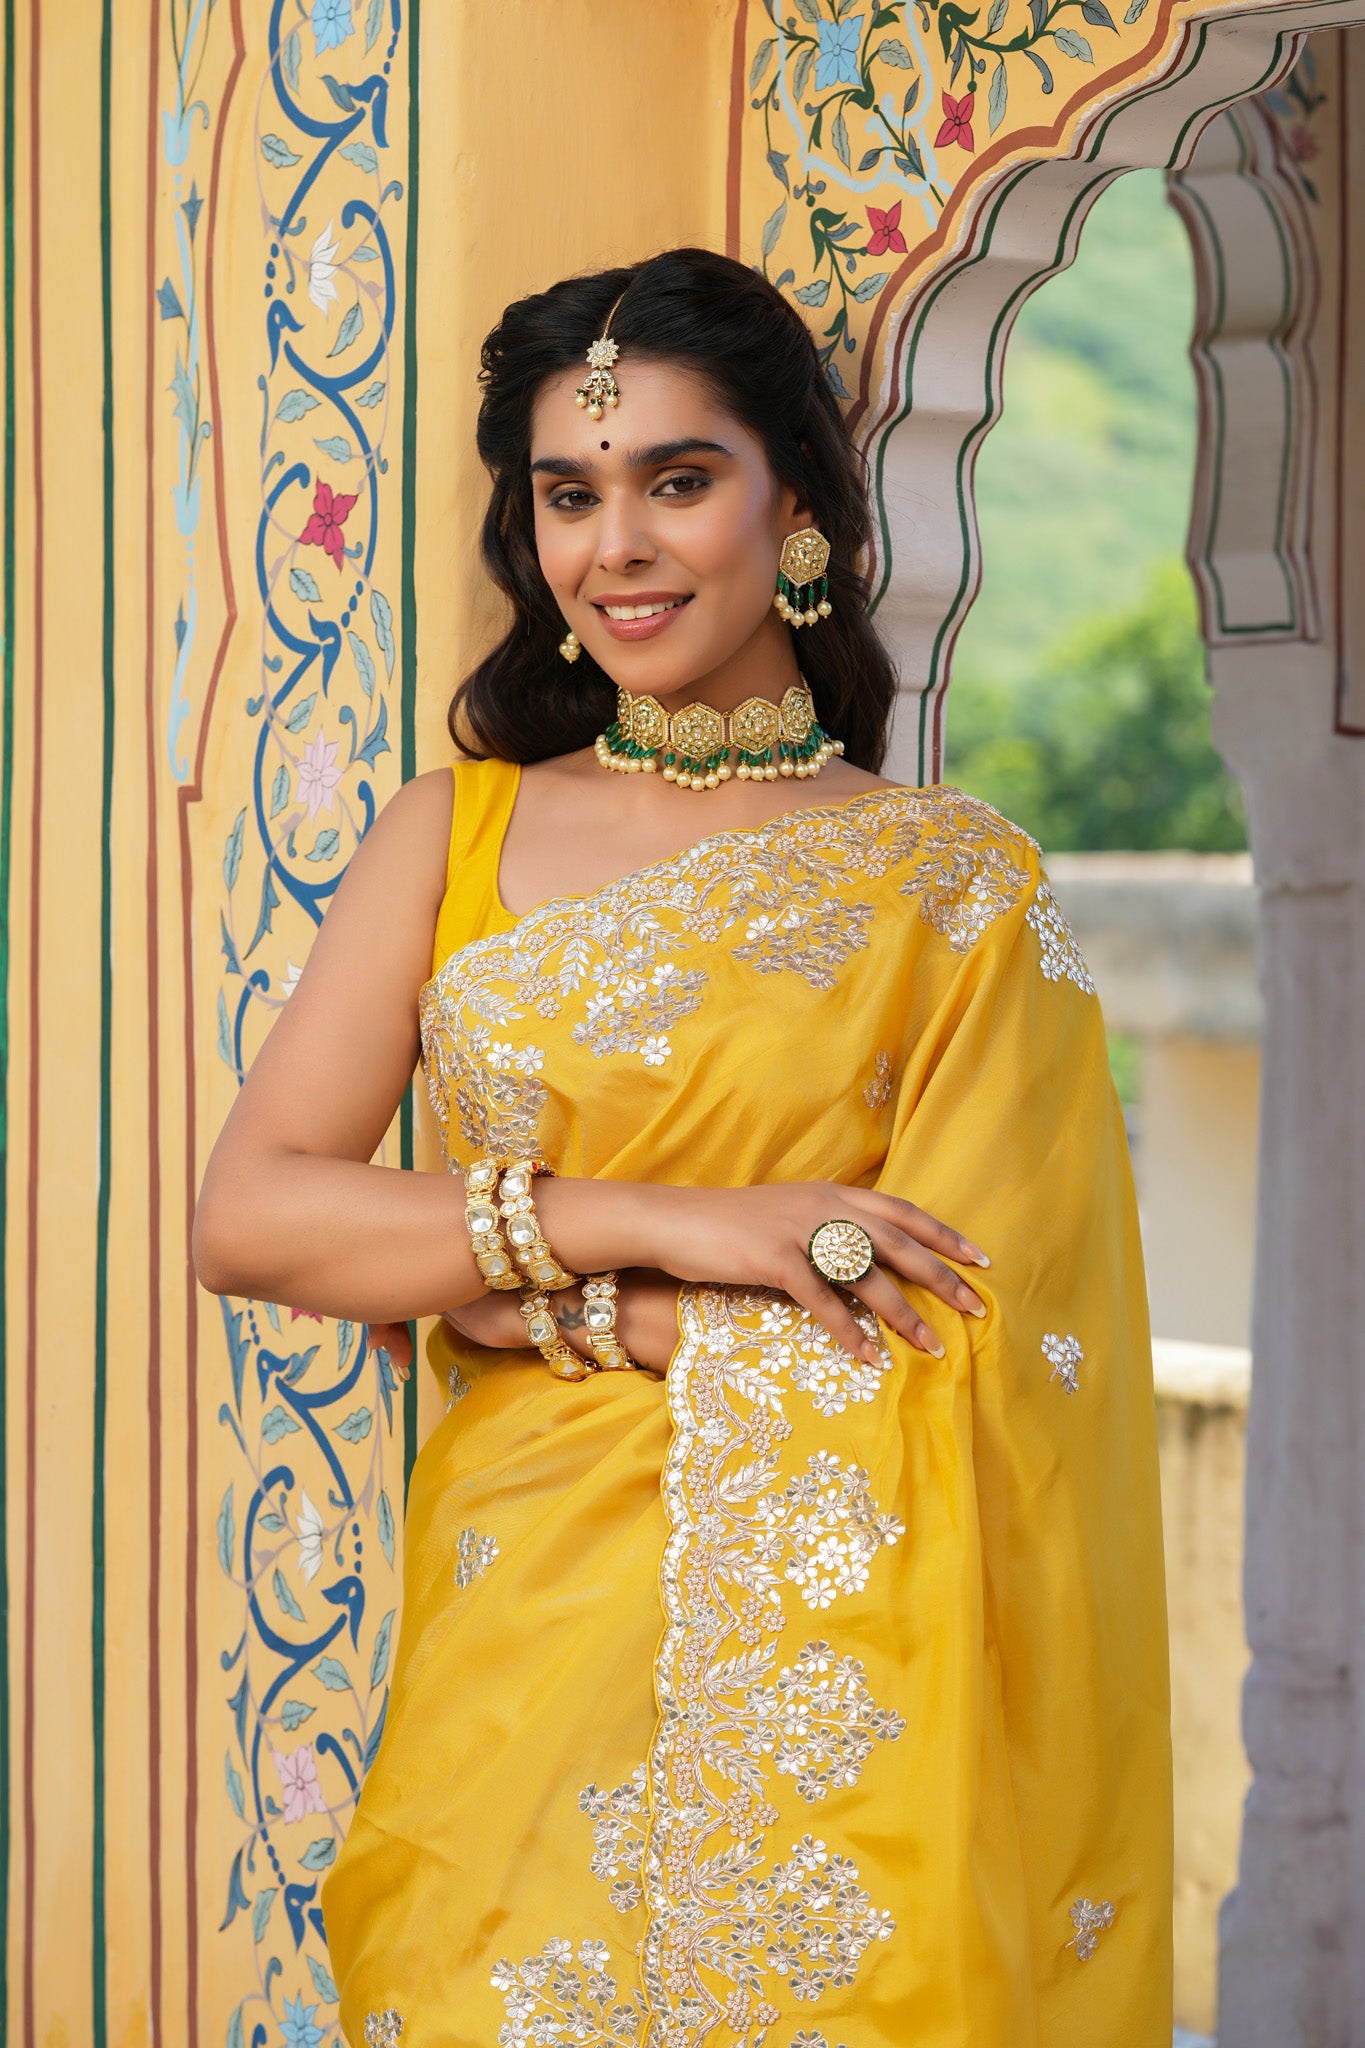 Buy yellow tussar georgette saree online in USA with embroidered border. Make a fashion statement at weddings with stunning designer sarees, embroidered sarees with blouse, wedding sarees, handloom sarees from Pure Elegance Indian fashion store in USA.-closeup